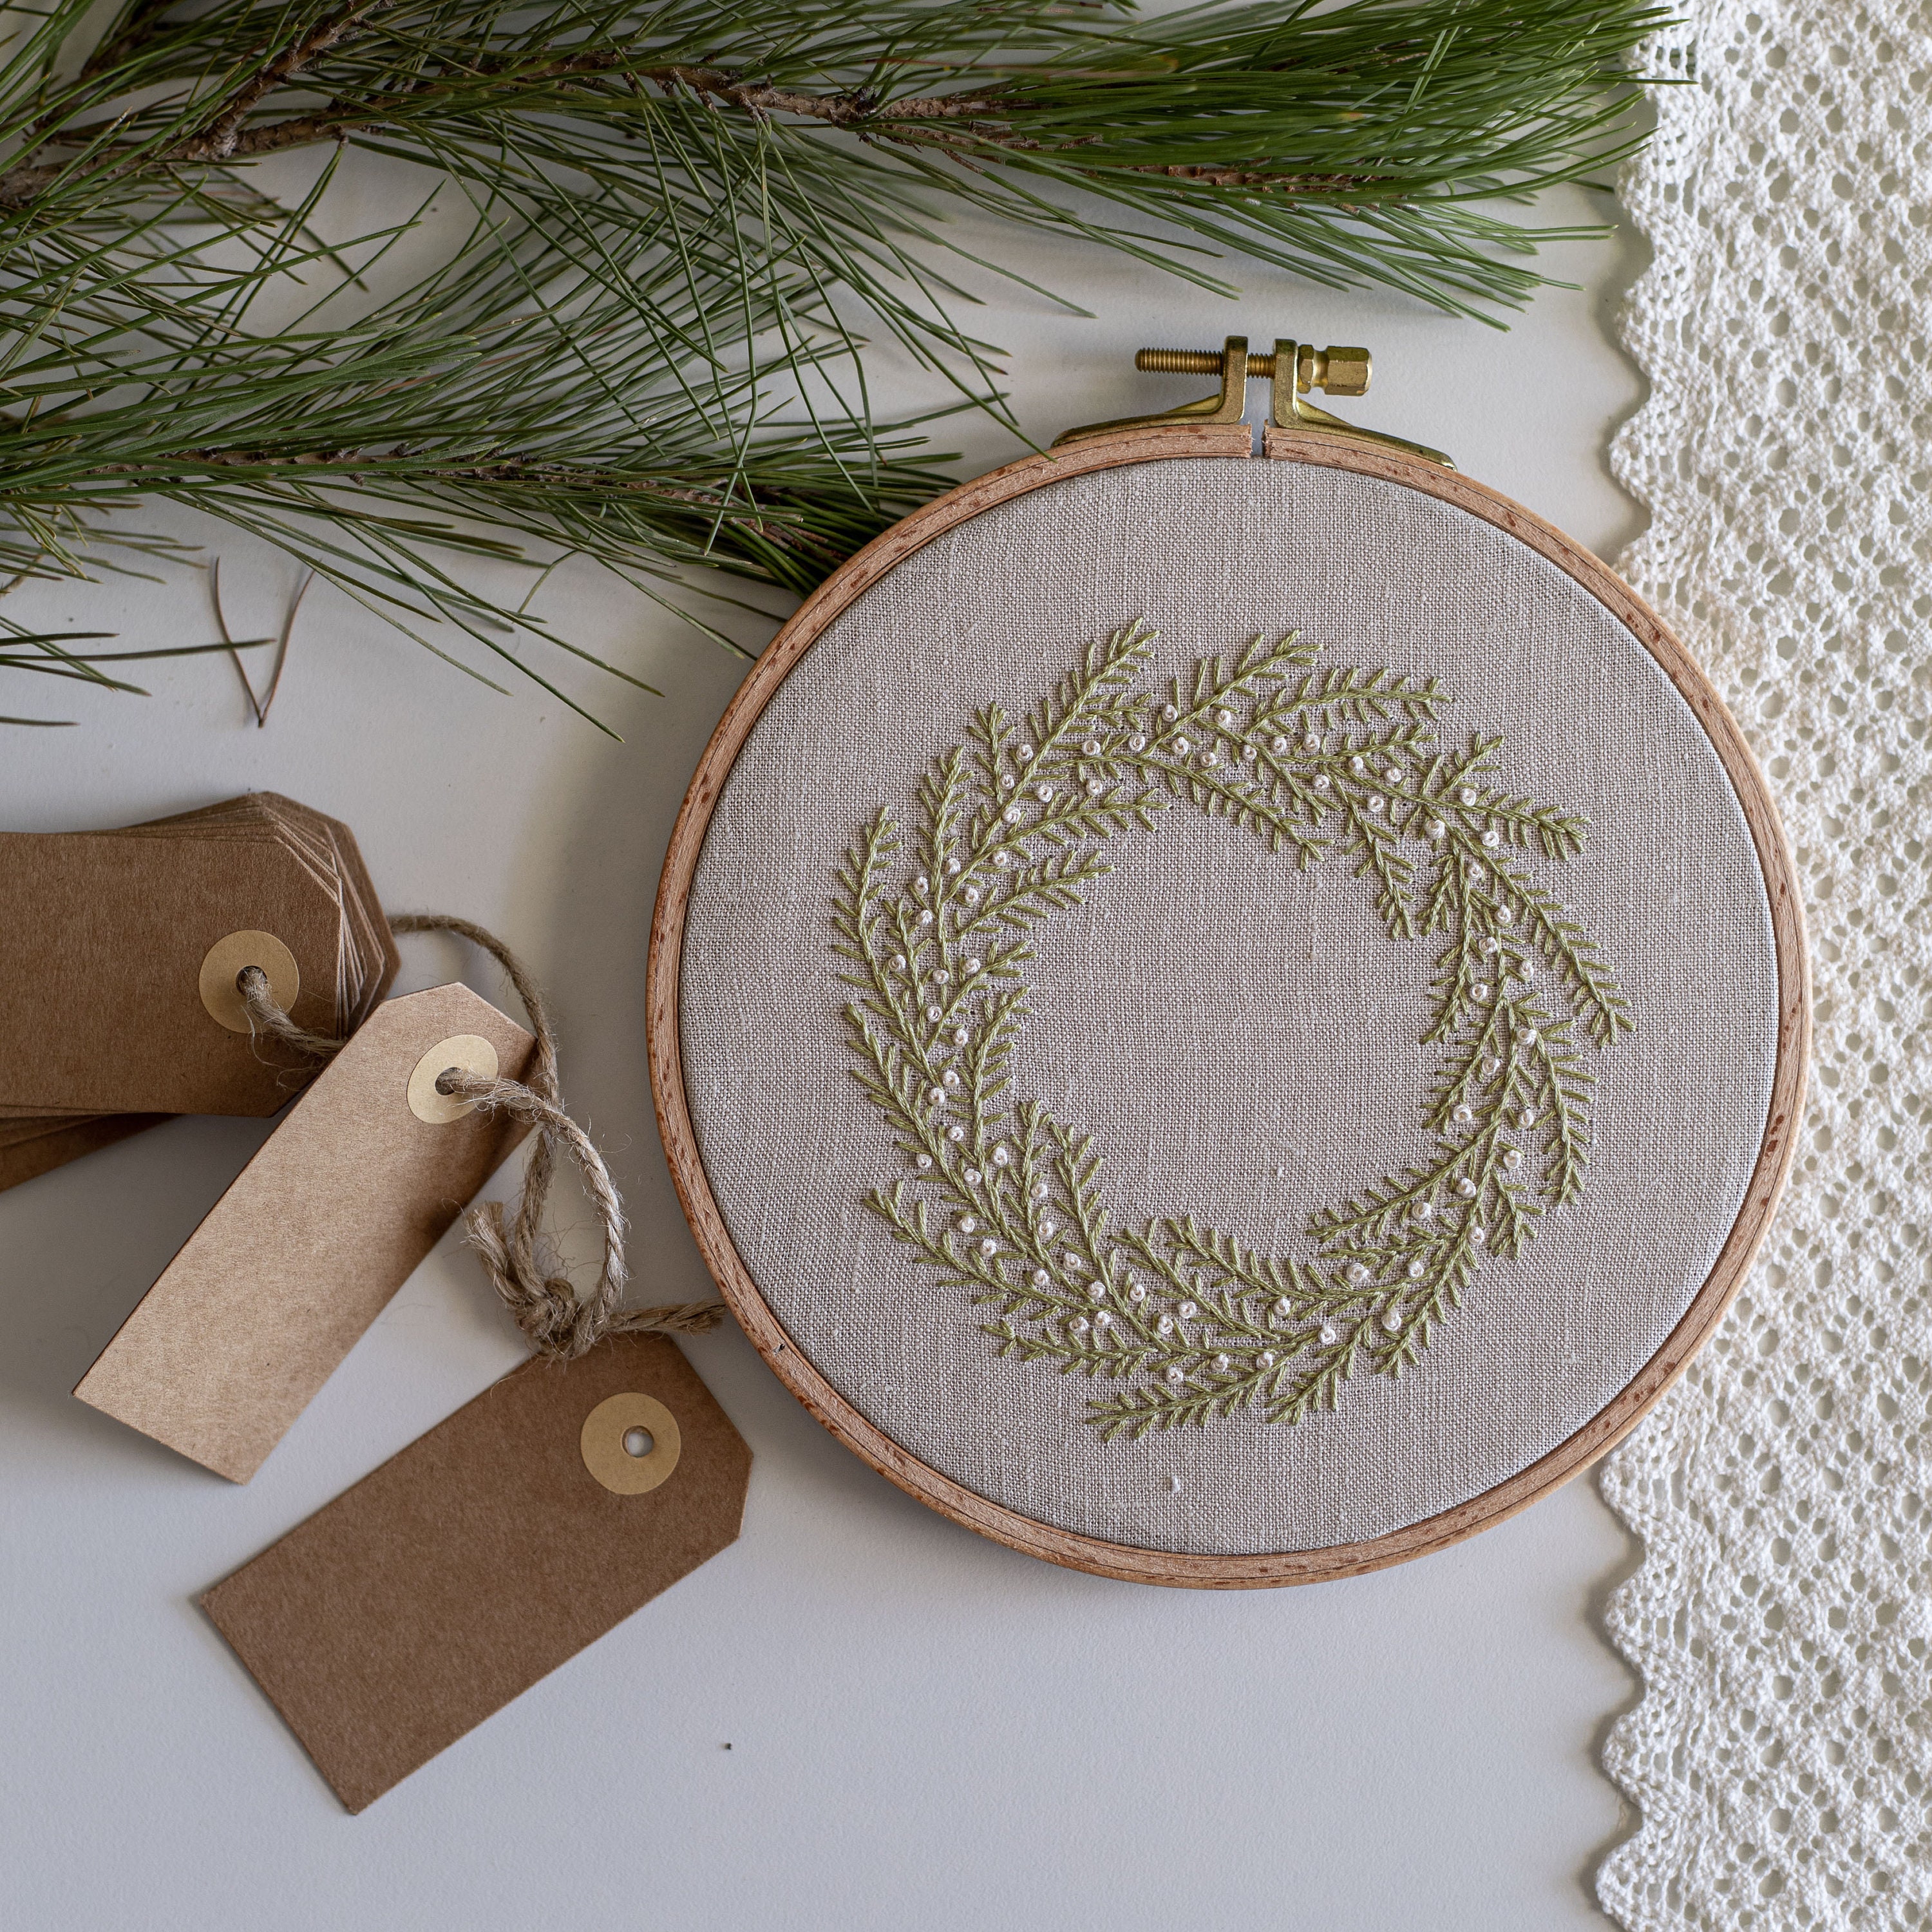 Christmas Embroideries - Northern ~ Digital Pattern + Video